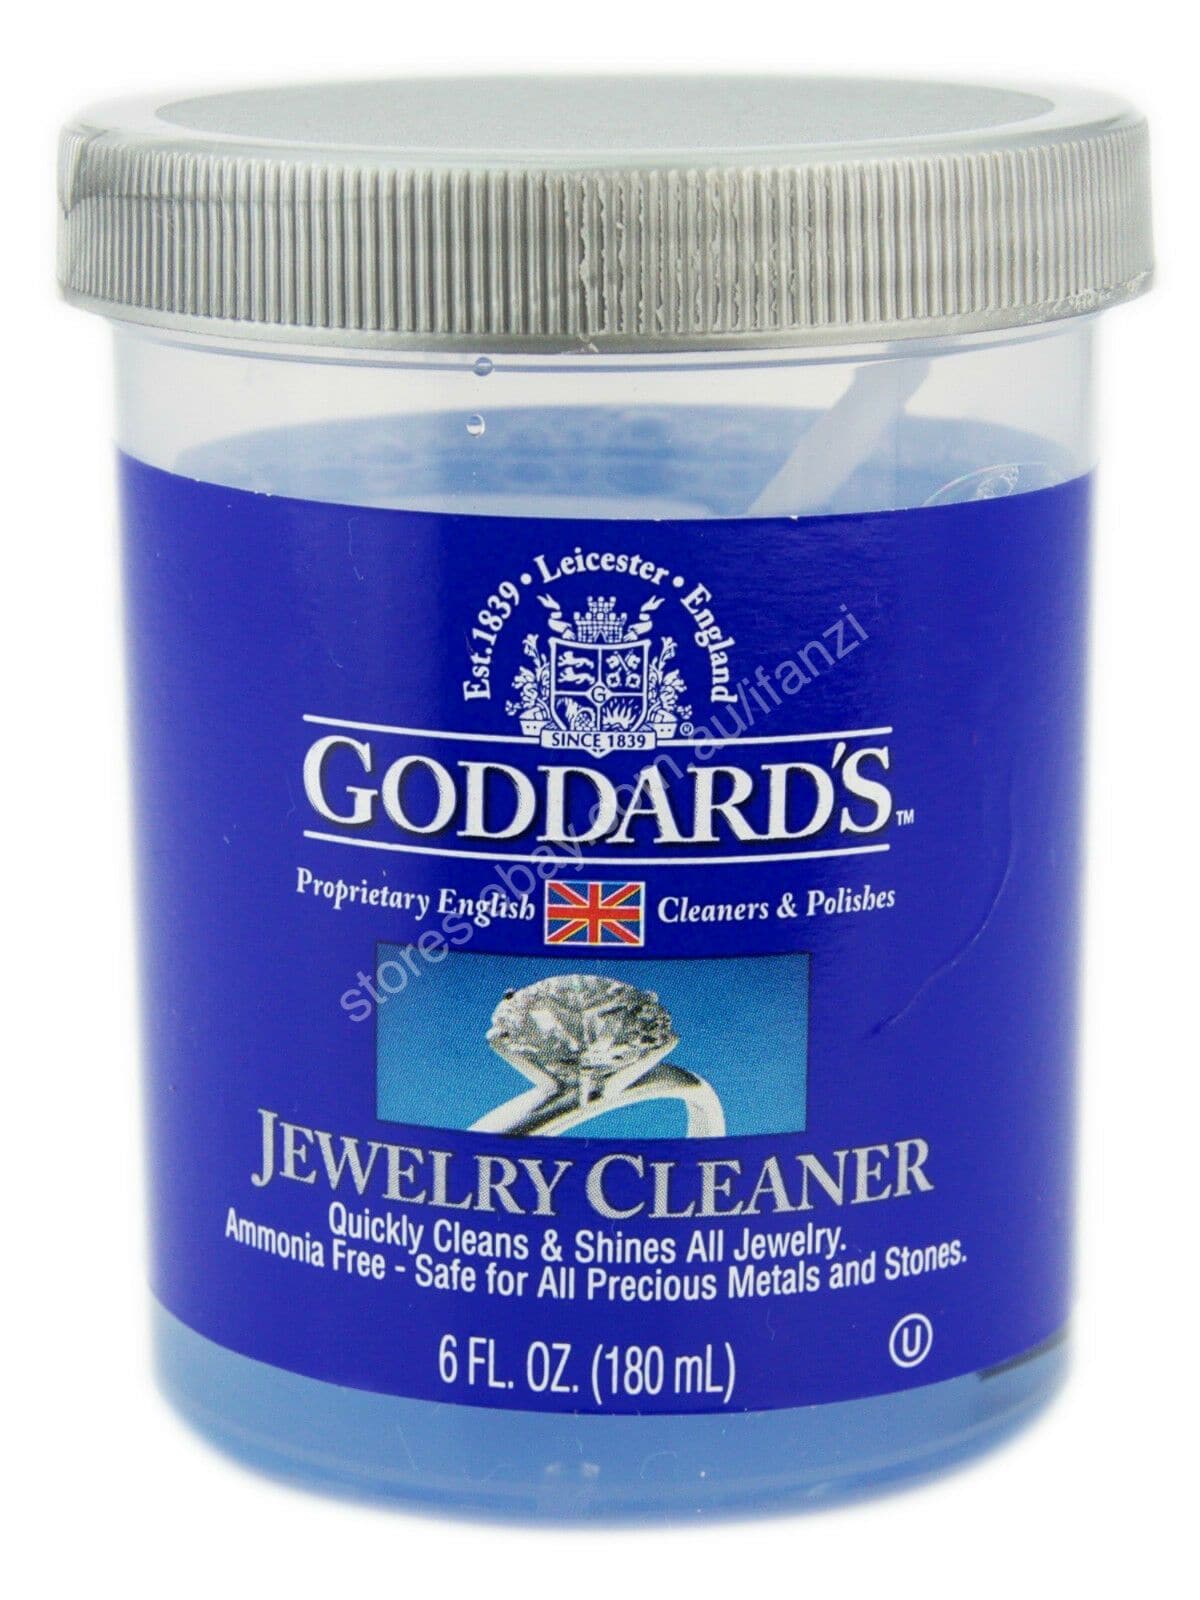 Goddard's Jewelry Cleaner continues to utilize that high-quality jewelry cleaning formulation to provide trusted cleaning performance.